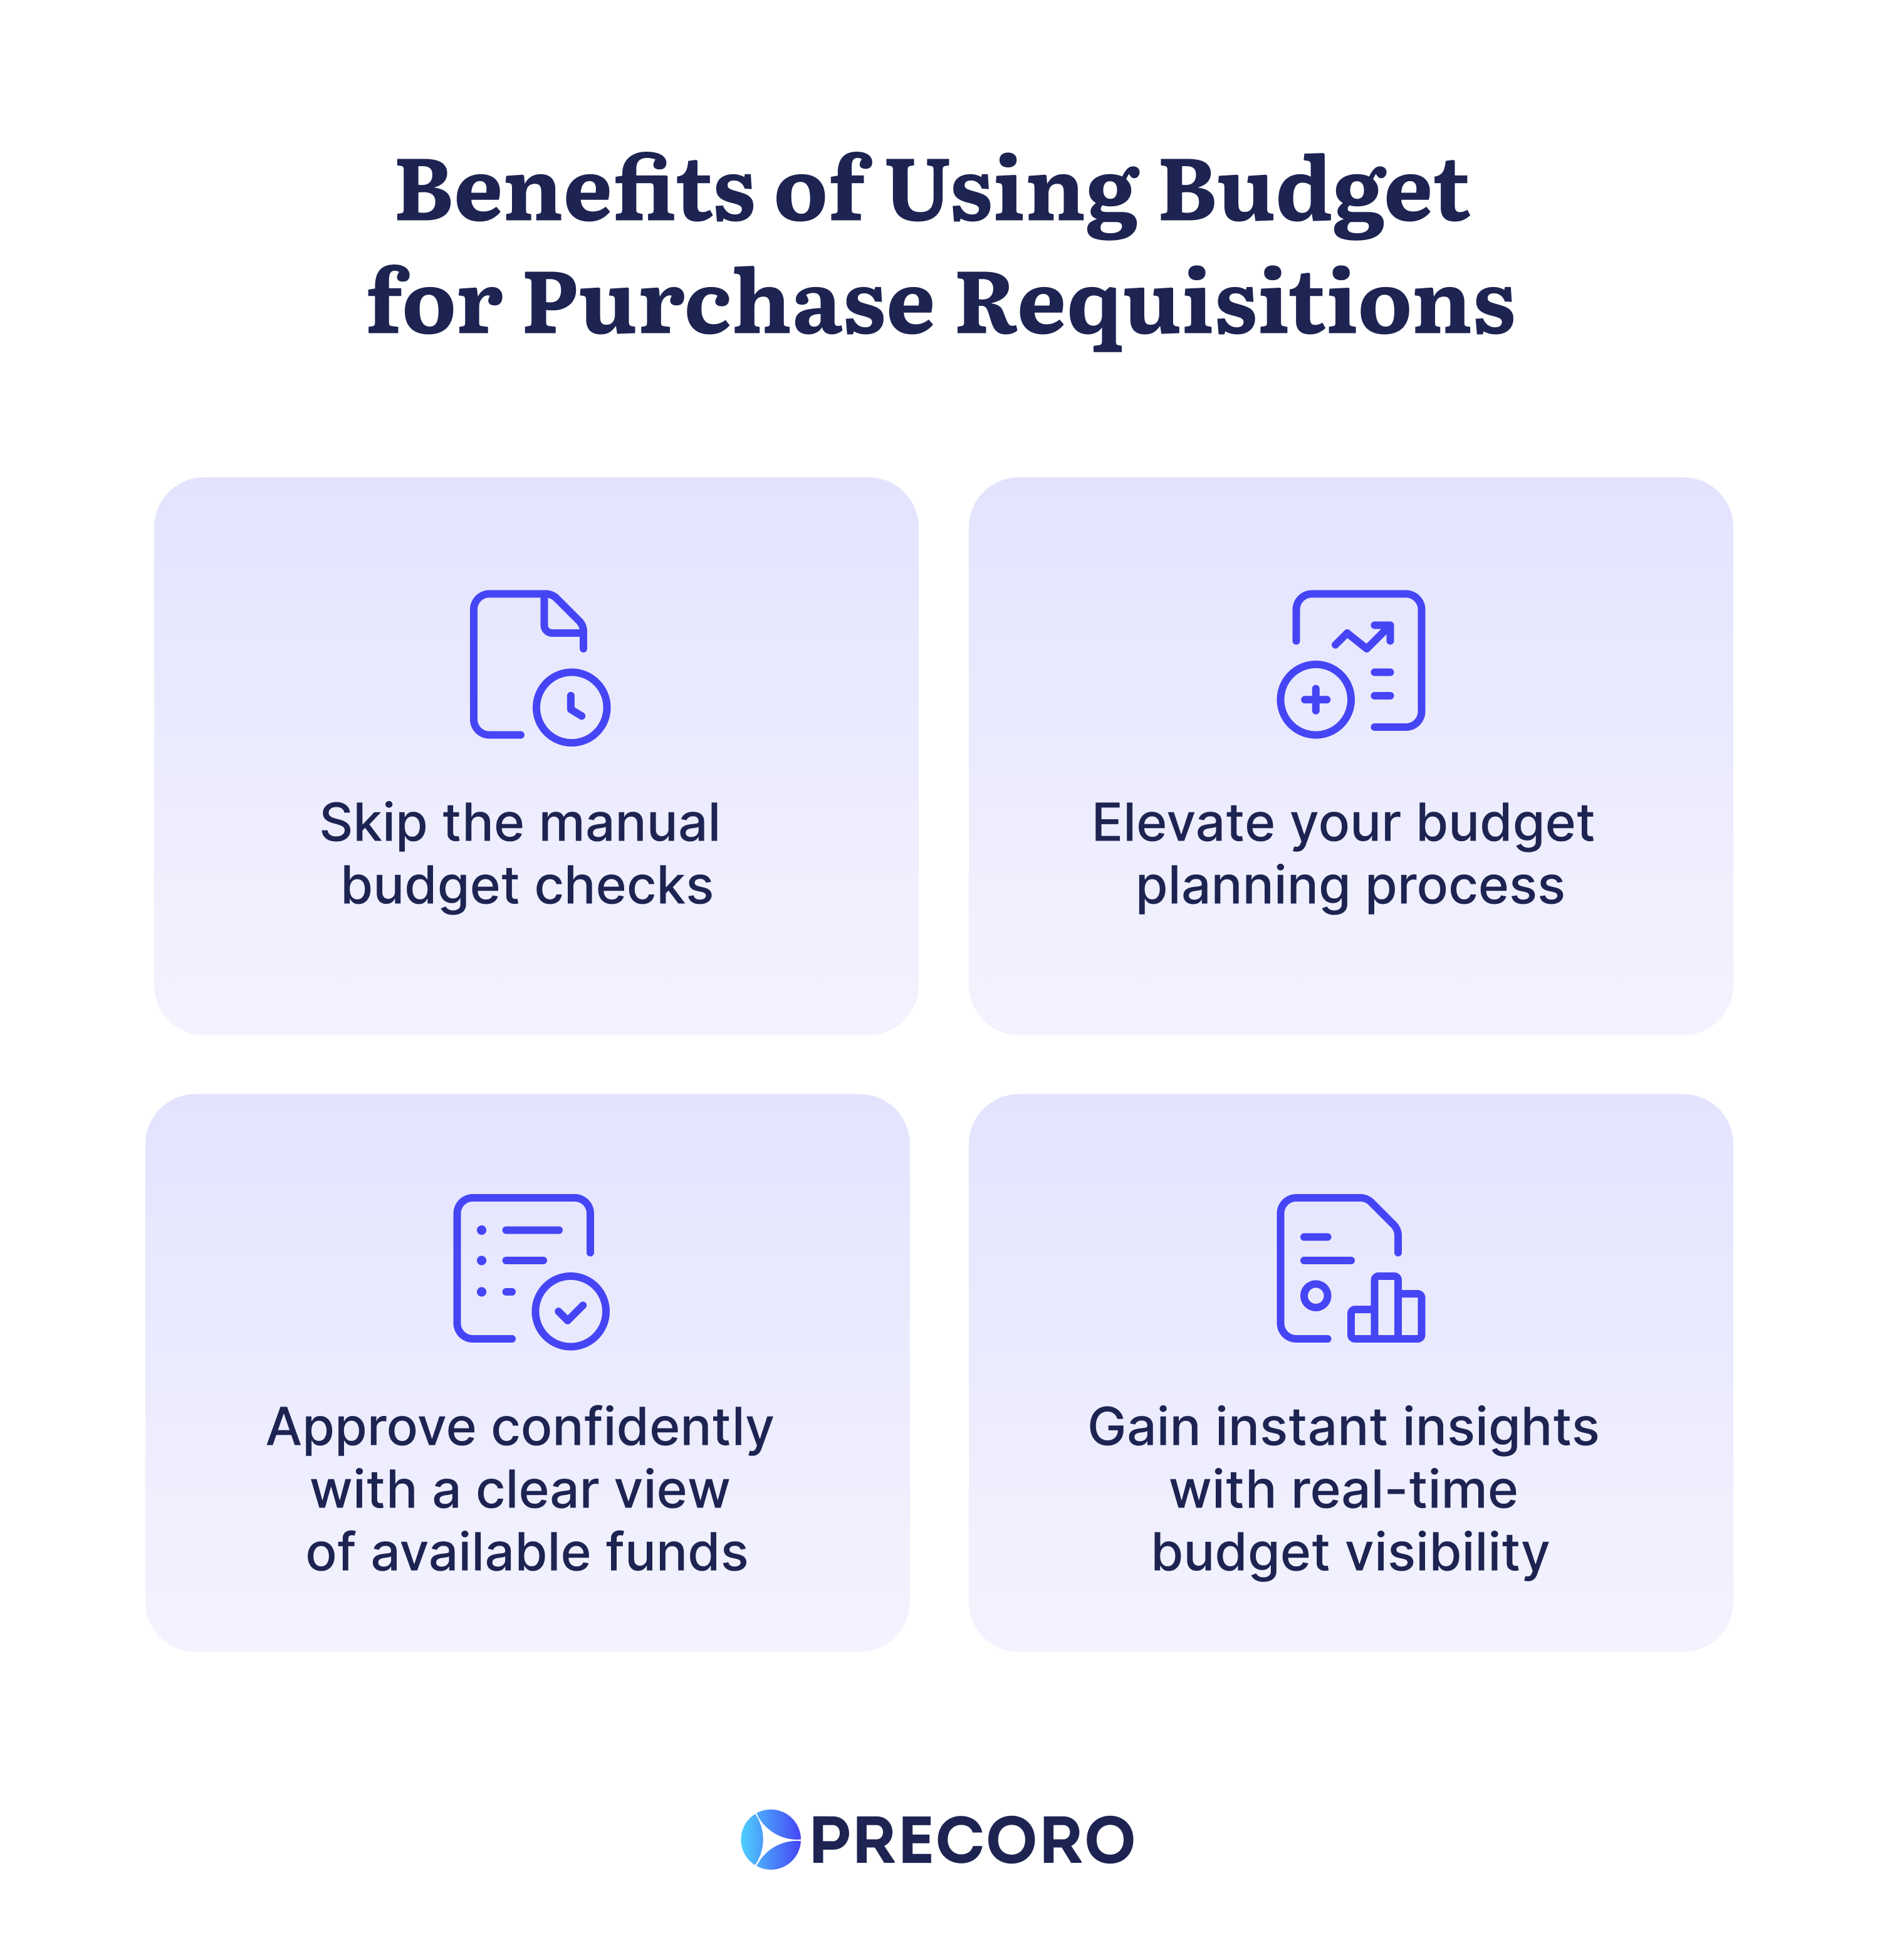 benefits of budget for purchase requision in precoro